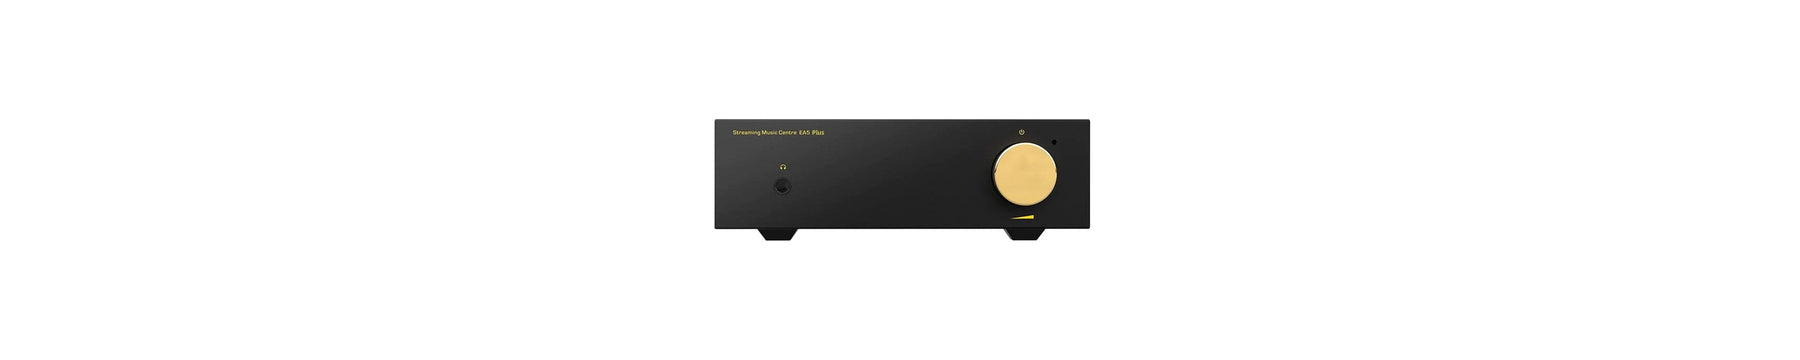 Shanling Launches All-New EA5 Plus Desktop All-in-One Streamer, DAC, and Amplifier!!